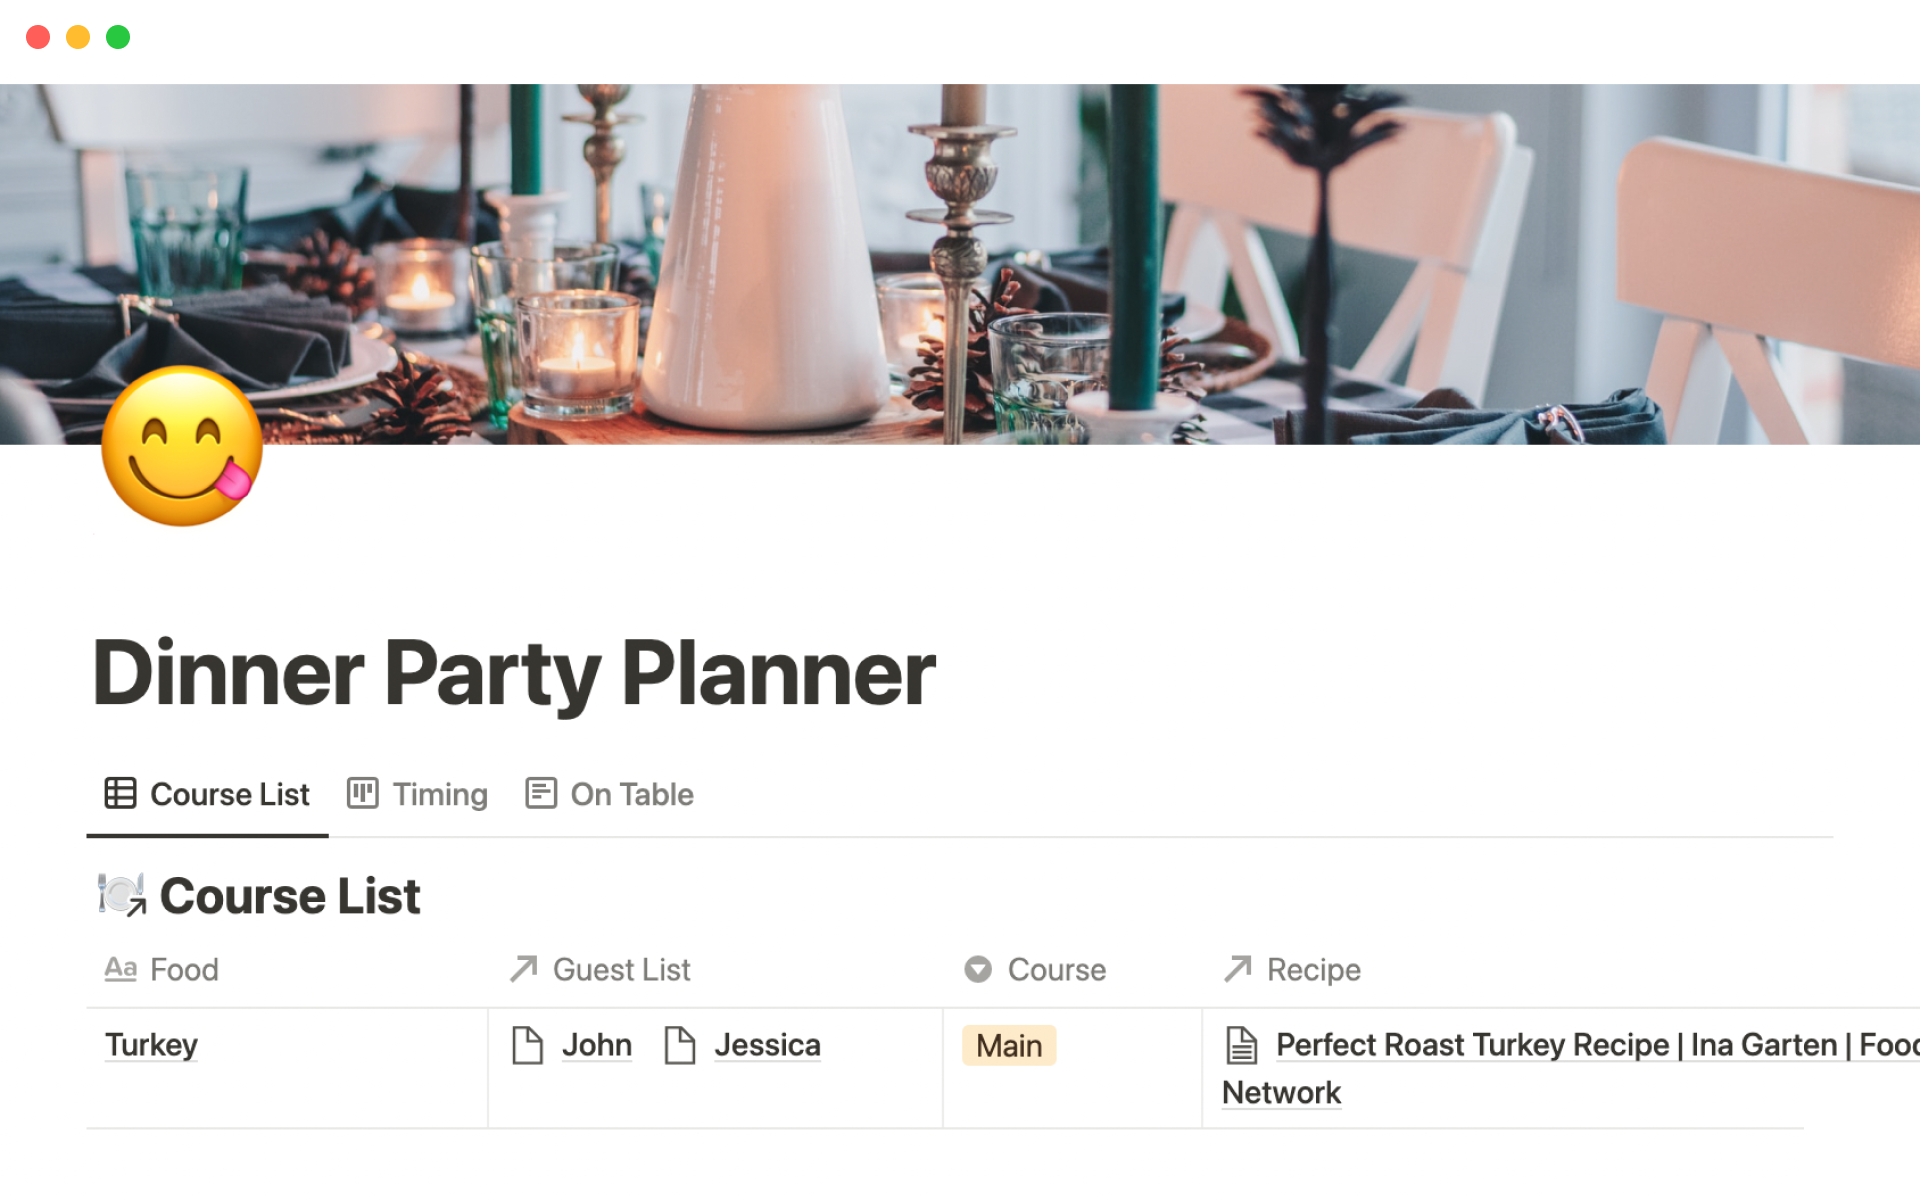 Helps anyone planning a dinner party, from course list ideation to plating on the day of.